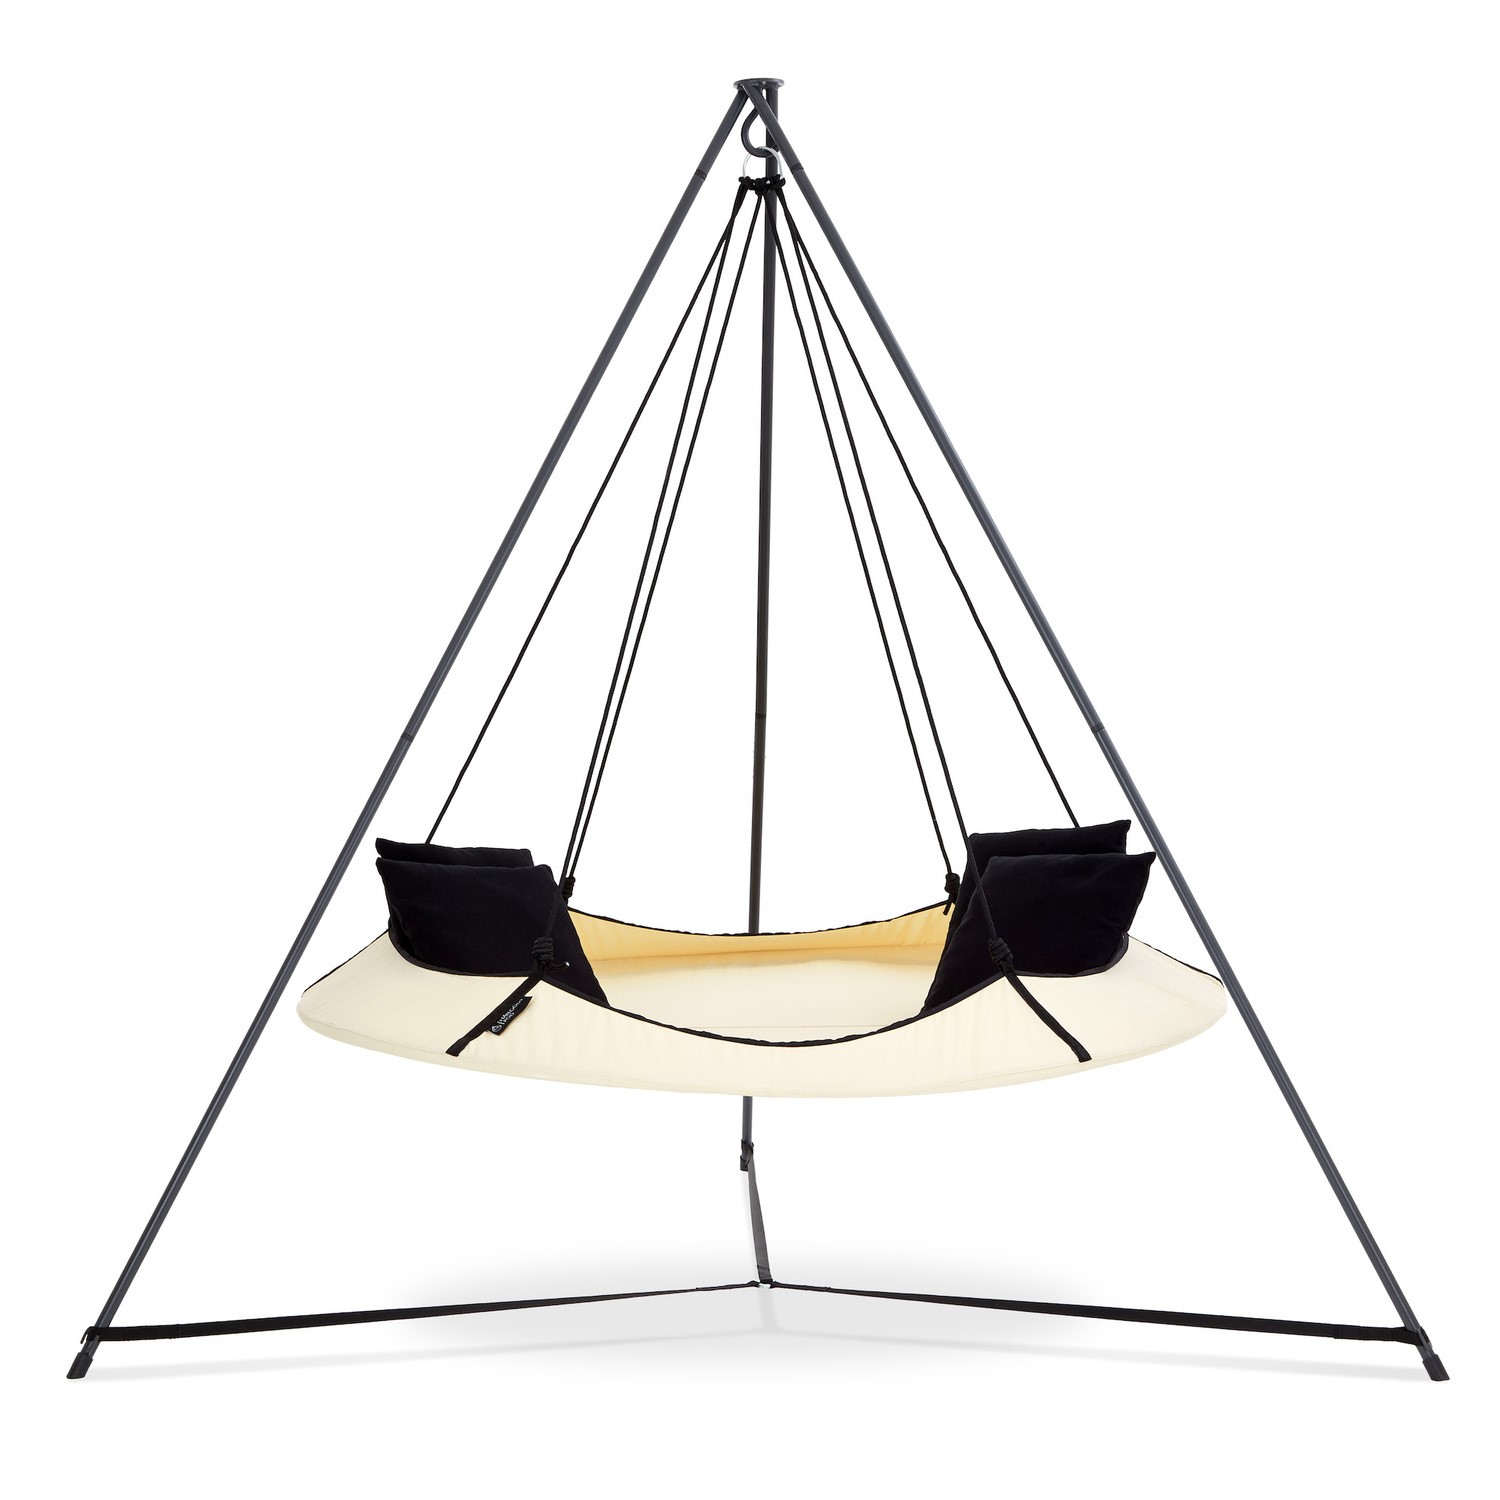 Read more about Hangout pod cream & black circular hammock bed with stand